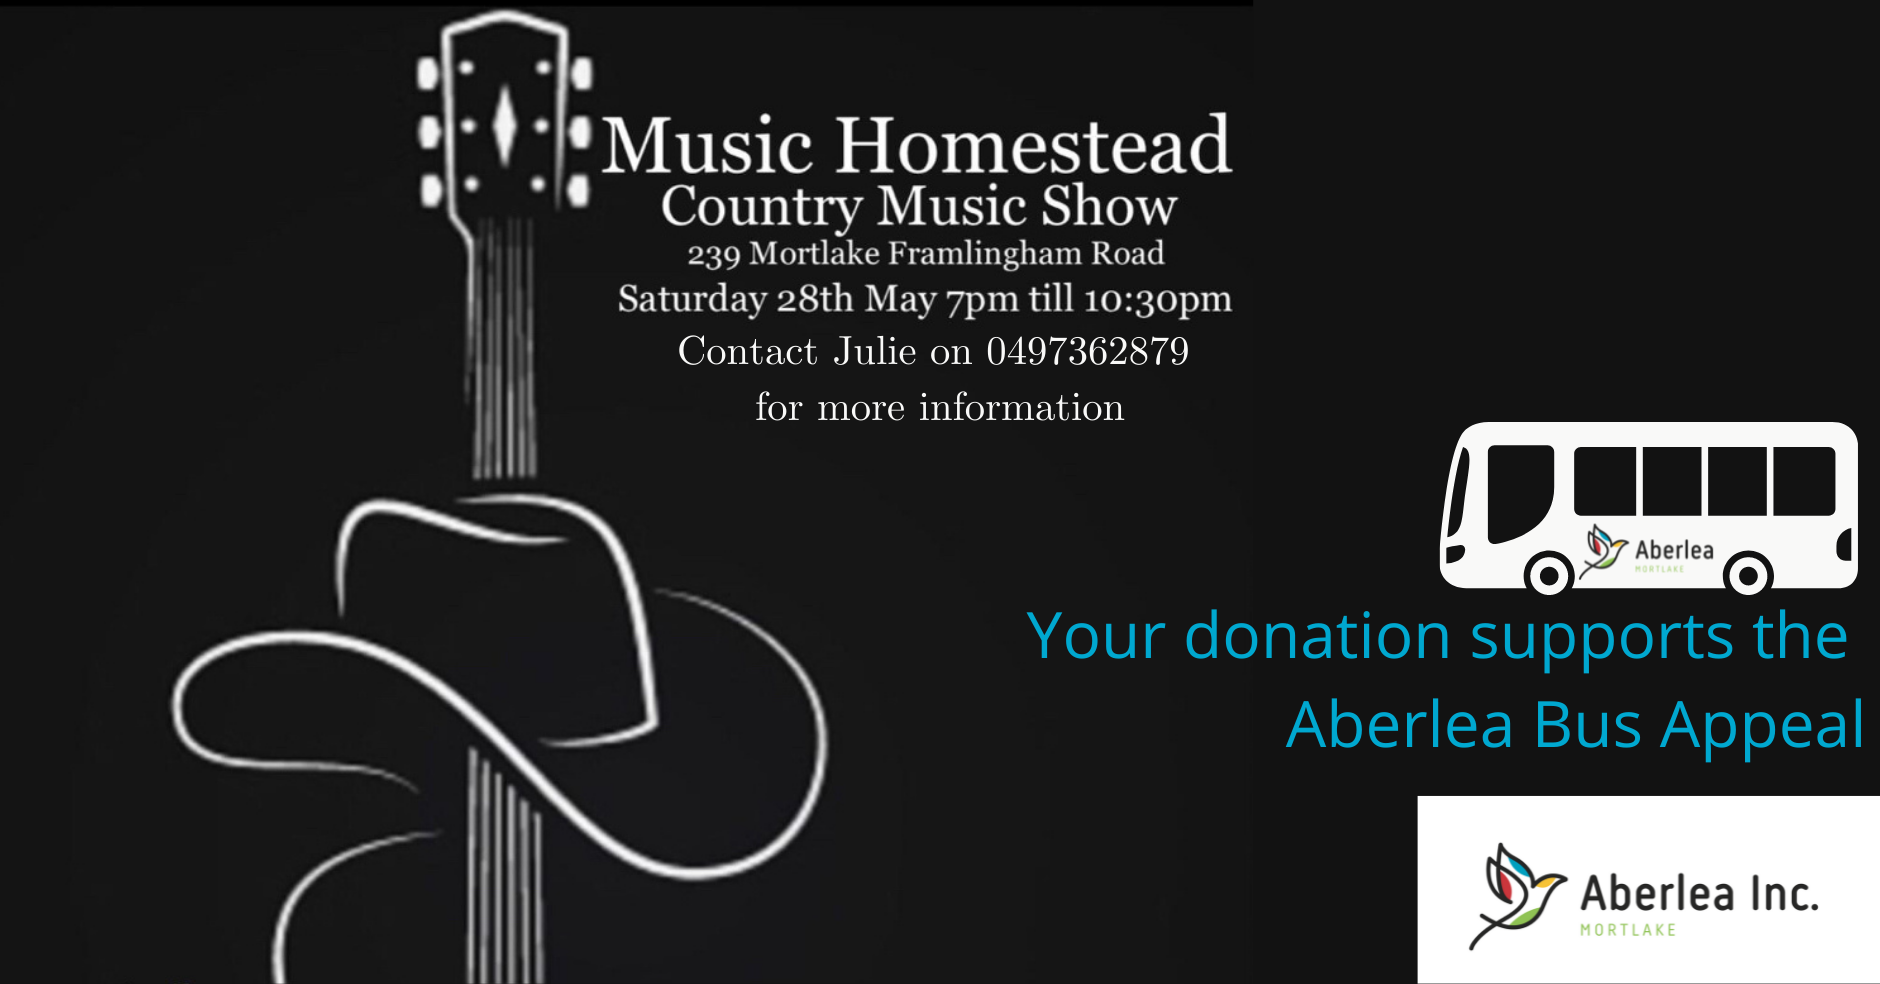 Country Music Show supports Aberlea Bus Appeal